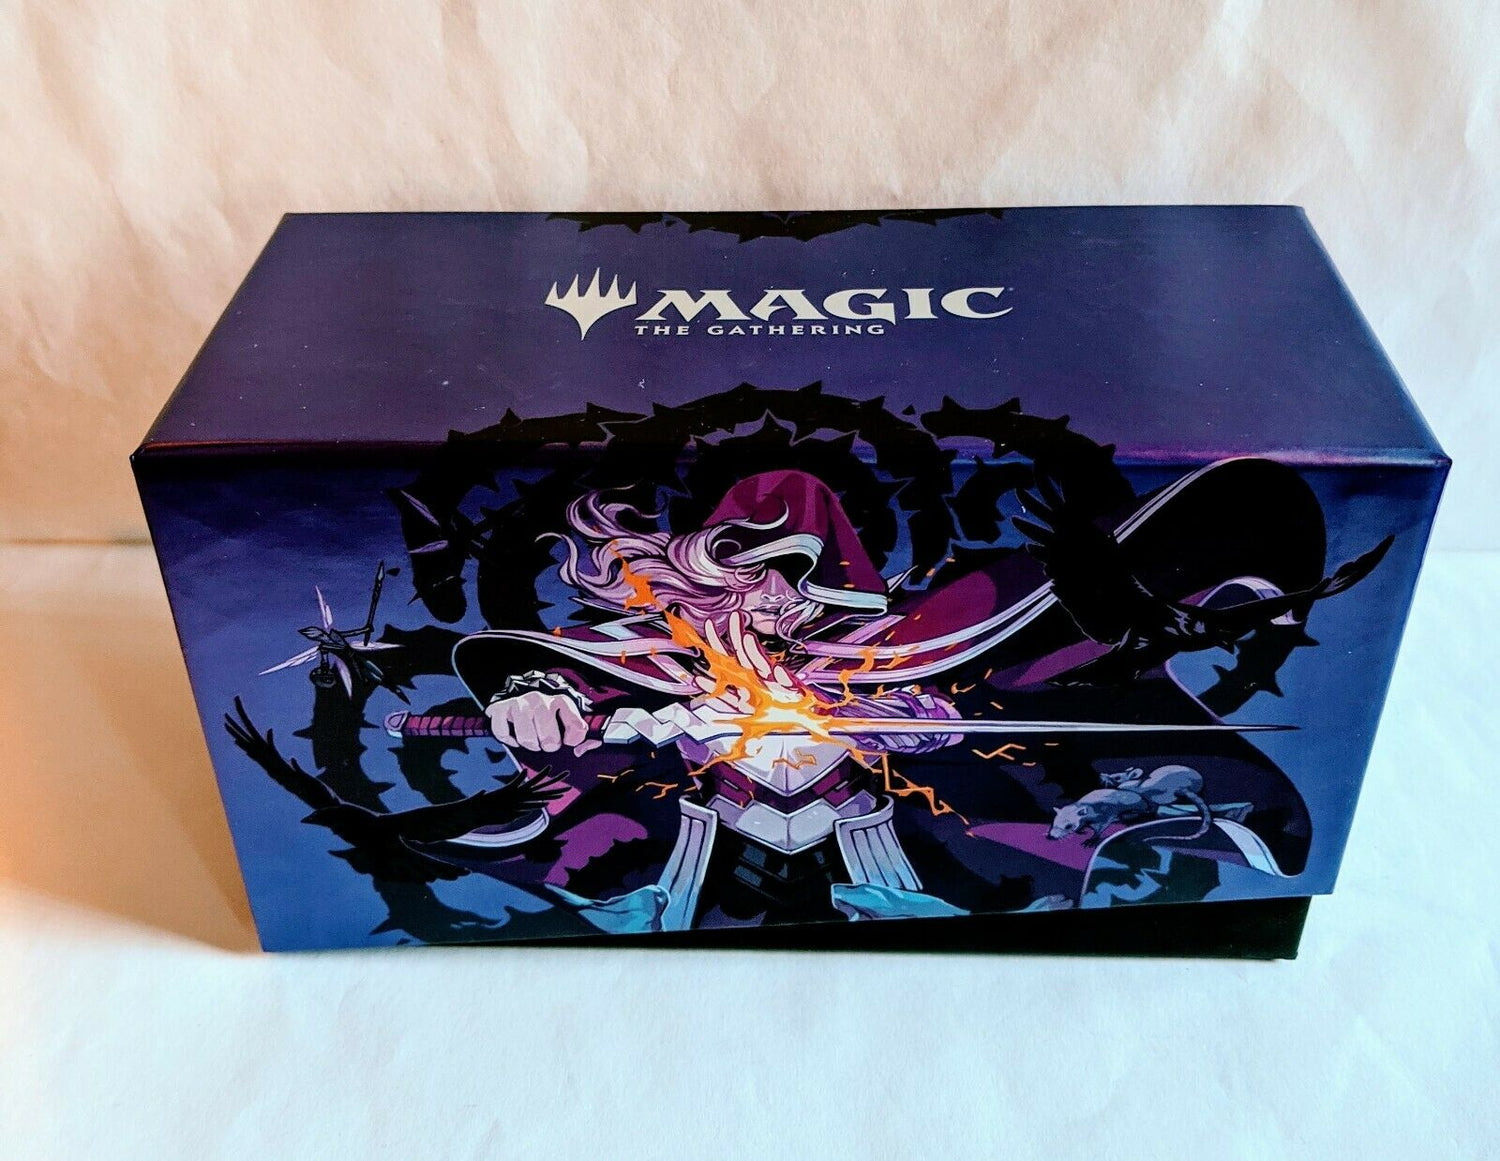 12 Packs - Throne of Eldraine Collector Booster Box REPACK with Free Box - Crusty Games